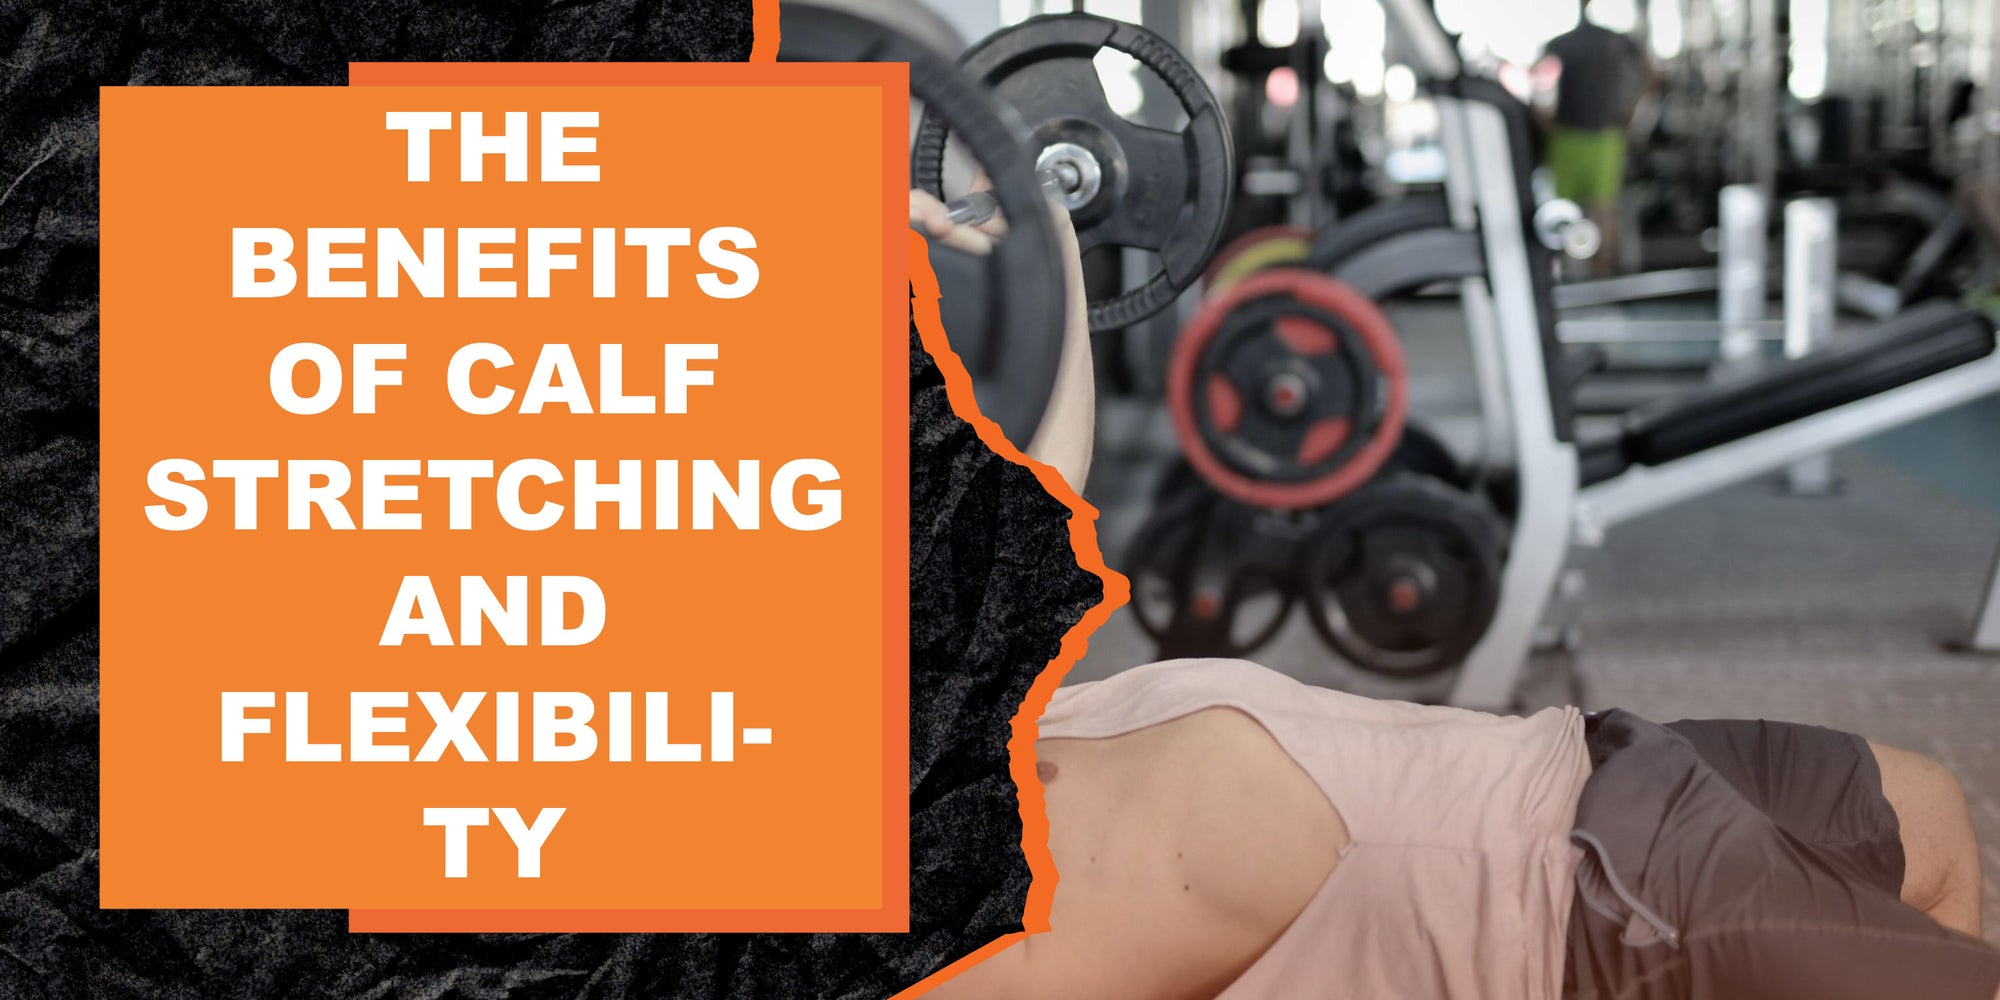 The Benefits of Calf Stretching and Flexibility